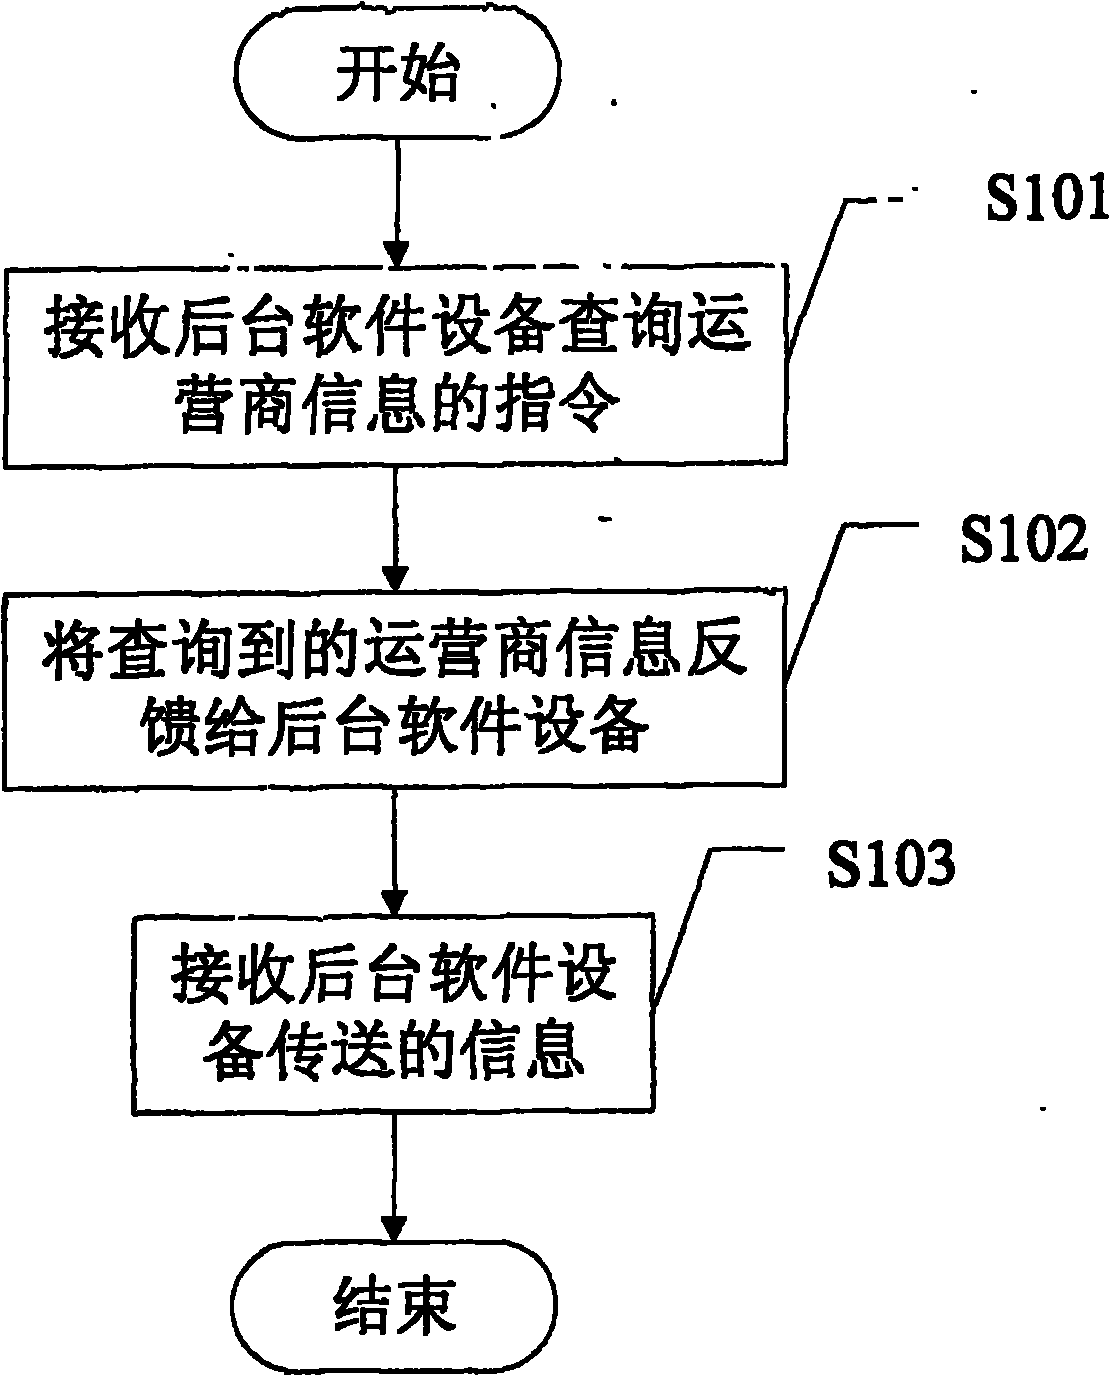 Method for displaying operator file, mobile terminal and background software equipment